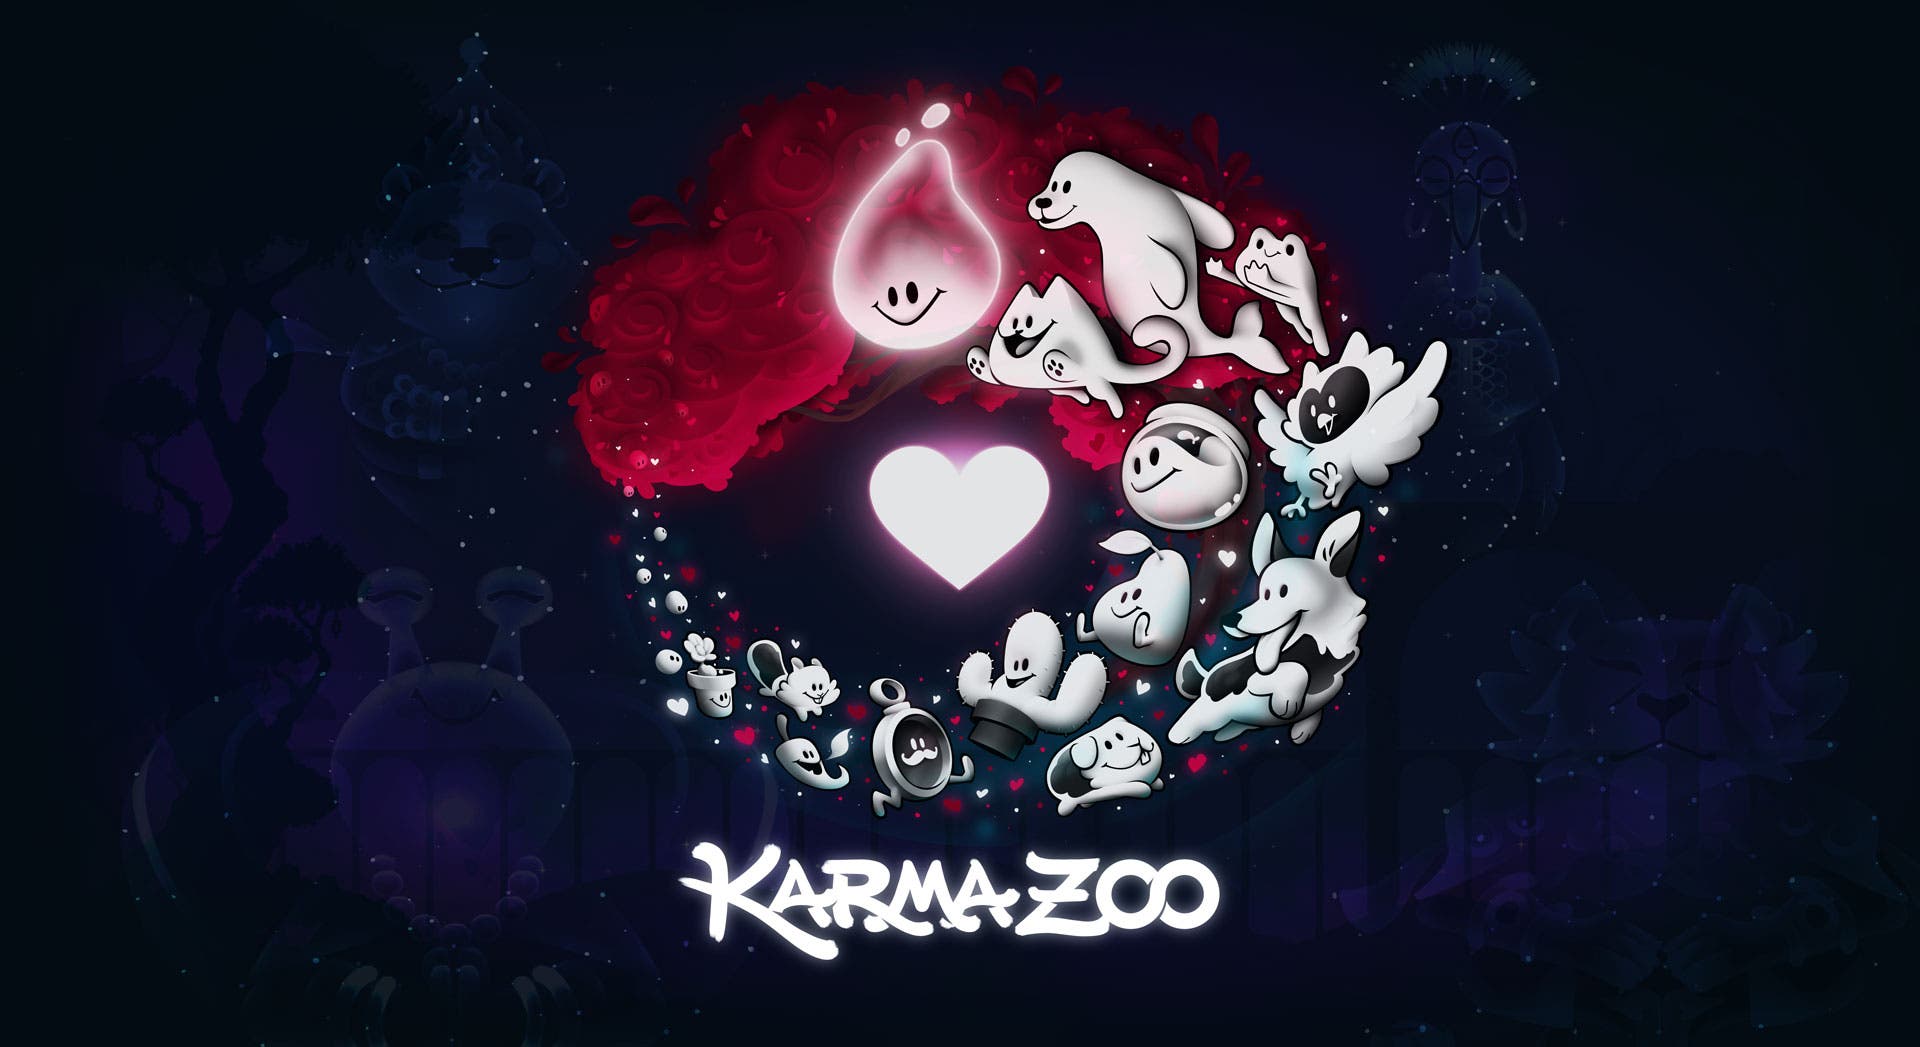 Share The Love and Die Trying in KarmaZoo